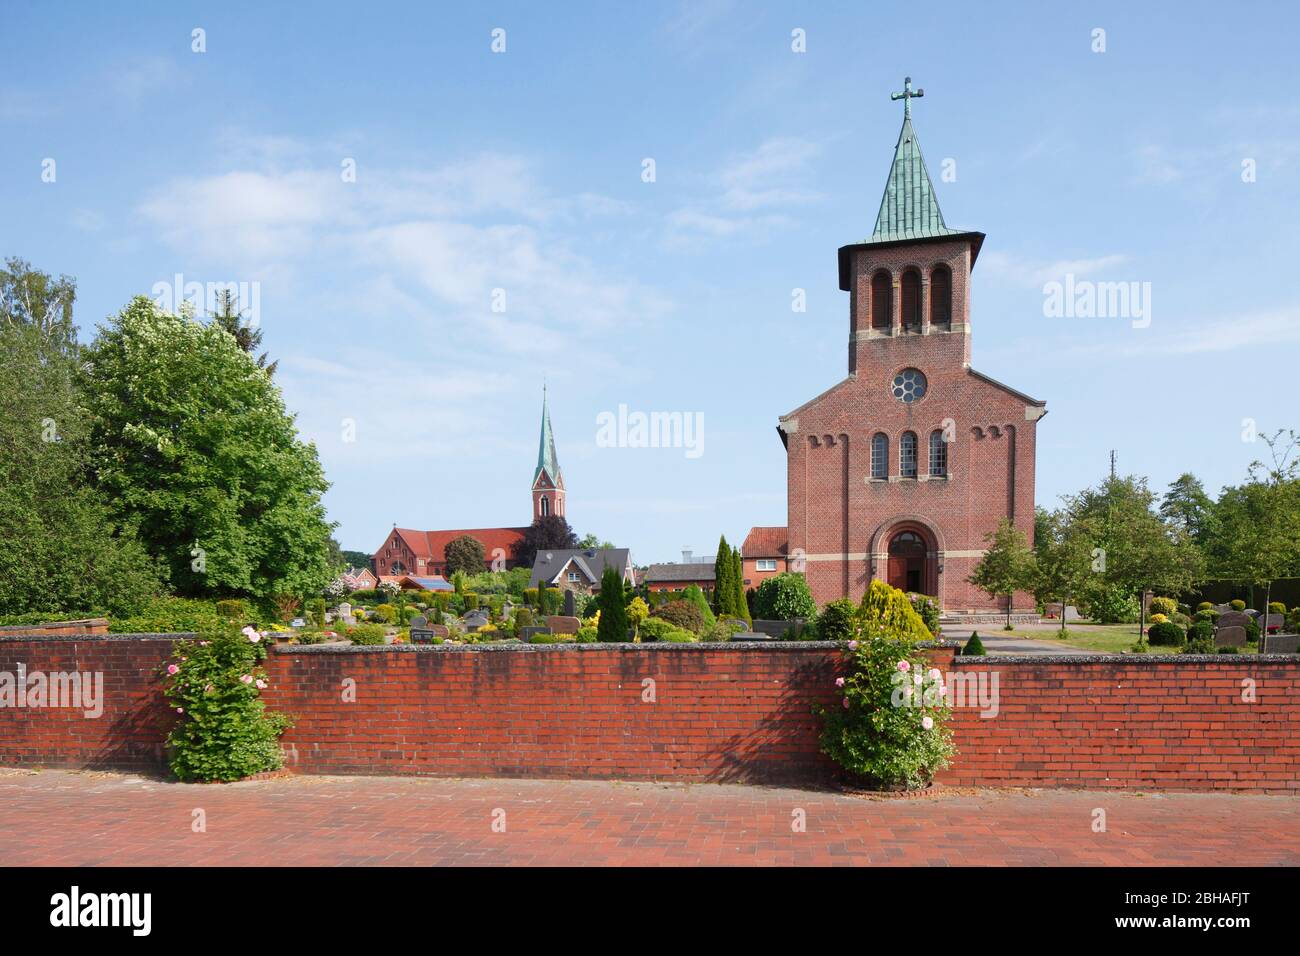 St. Gorgonius parish church and Martin Luther Church, Goldenstedt, Vechta district, Lower Saxony, Germany, Europe Stock Photo